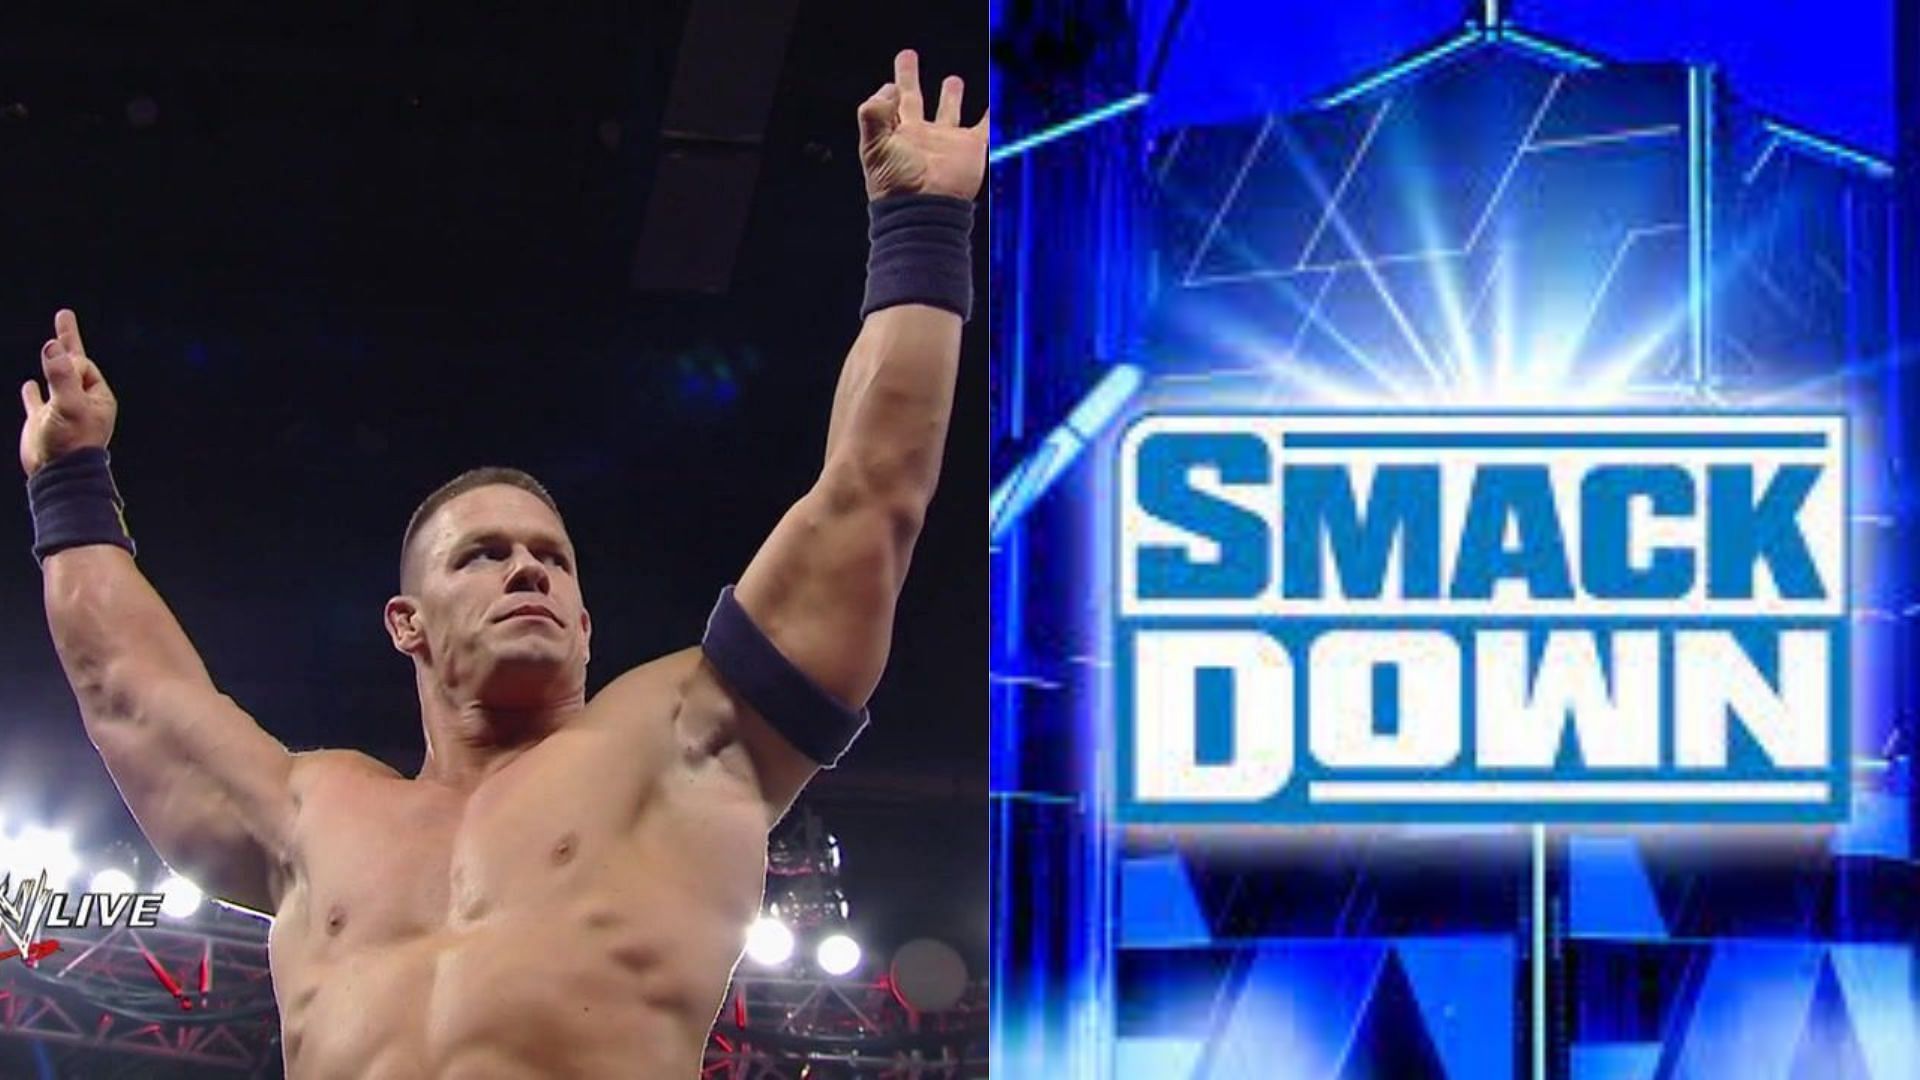 John Cena will return to WWE SmackDown after a long time